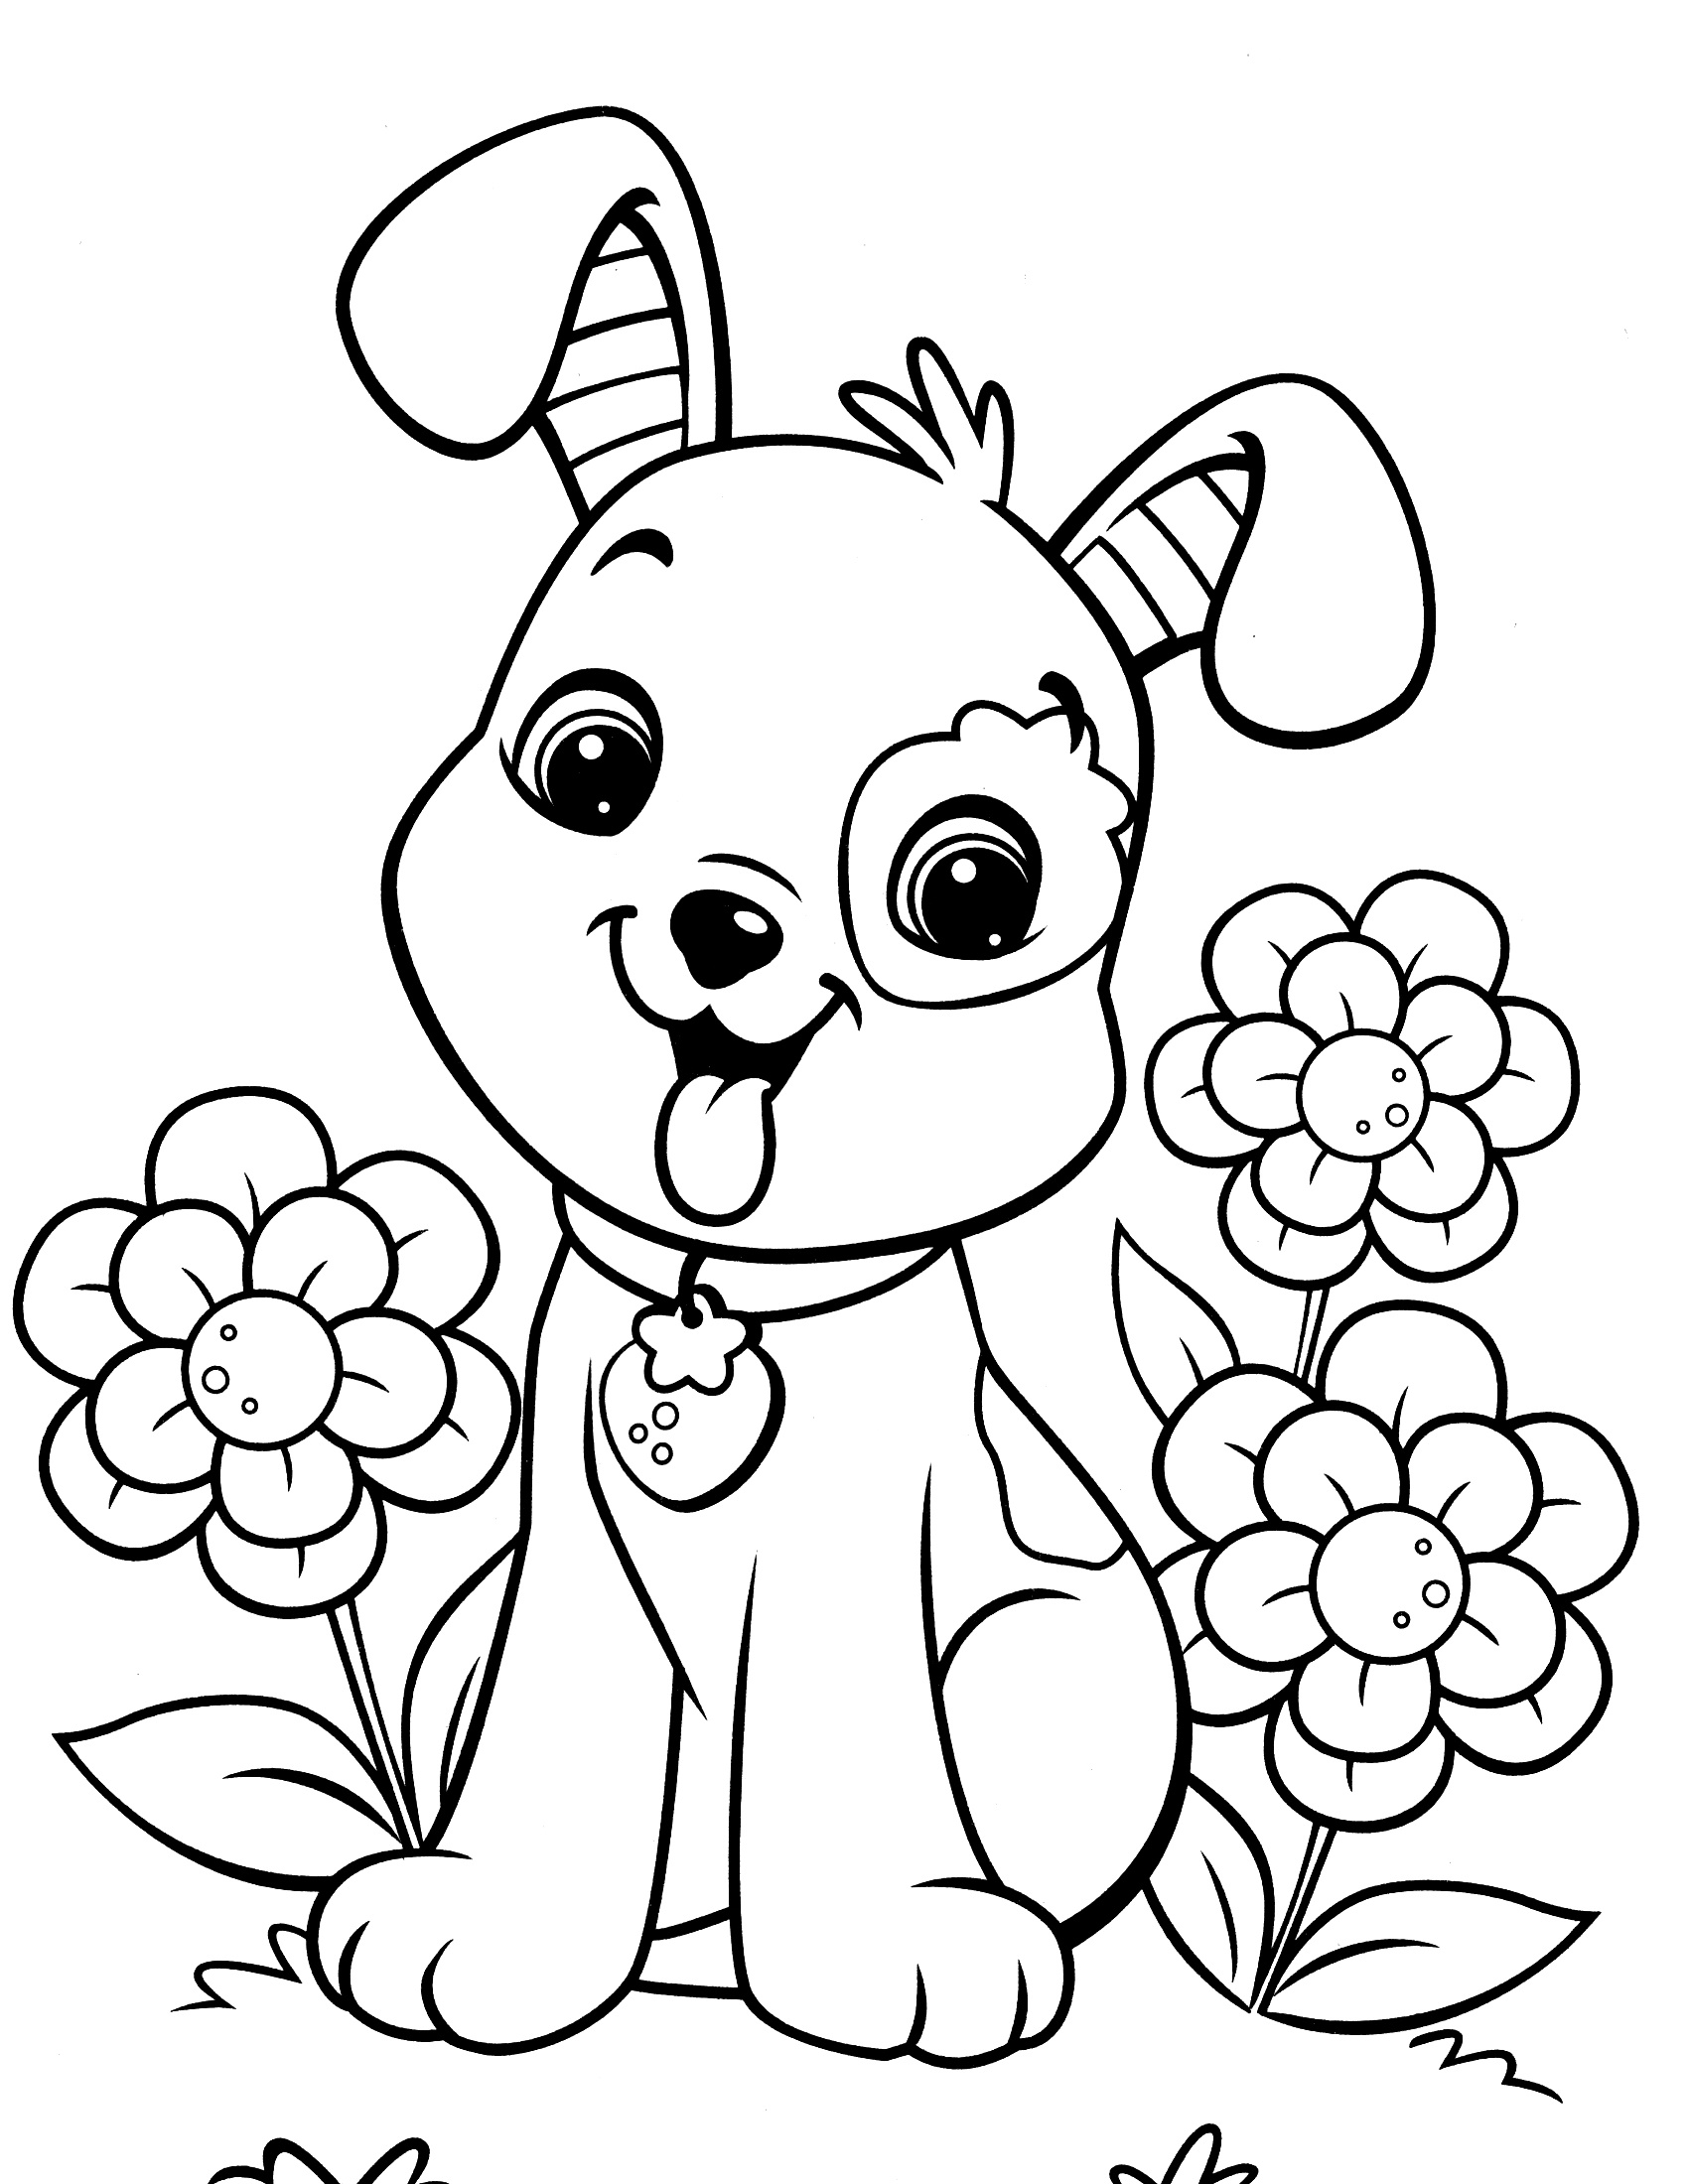 Coloring Sheets Of Dogs